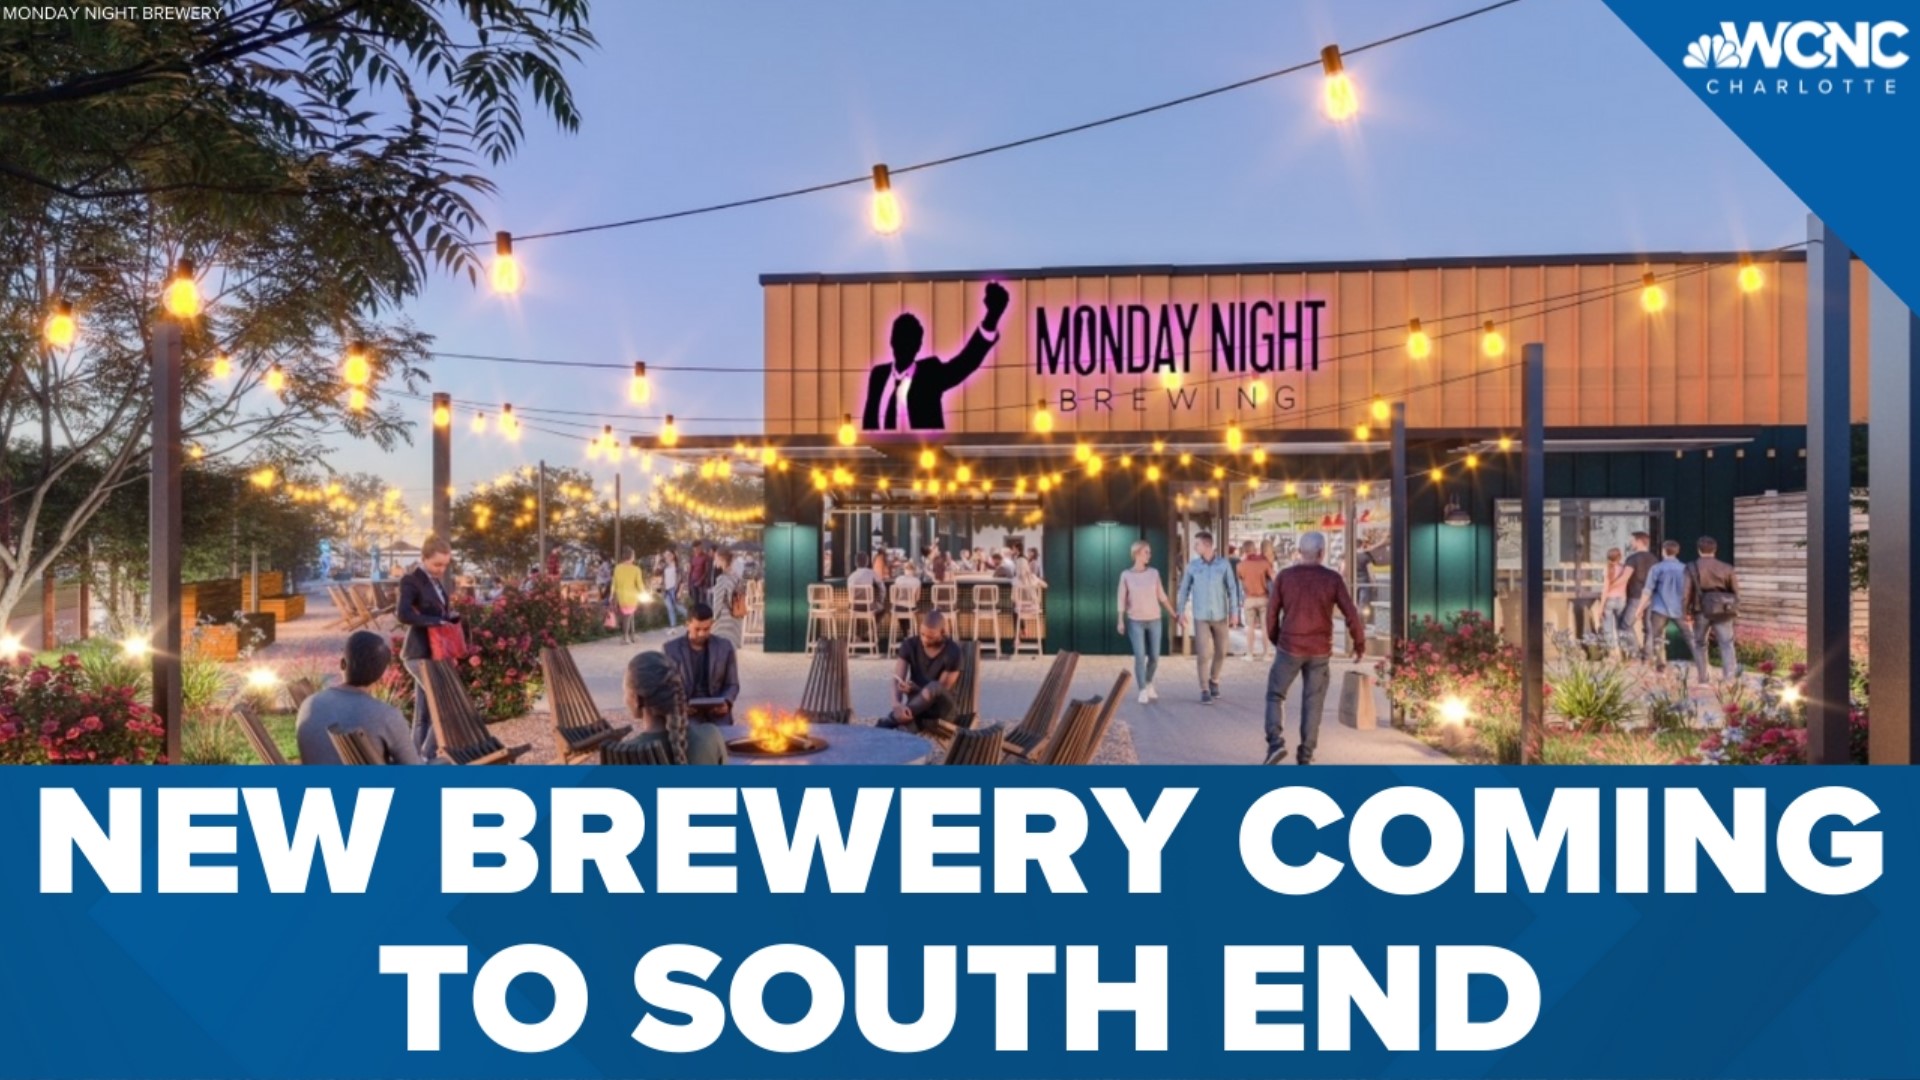 Atlanta-based Monday Night Brewing is opening a taproom on South Tryon Street.